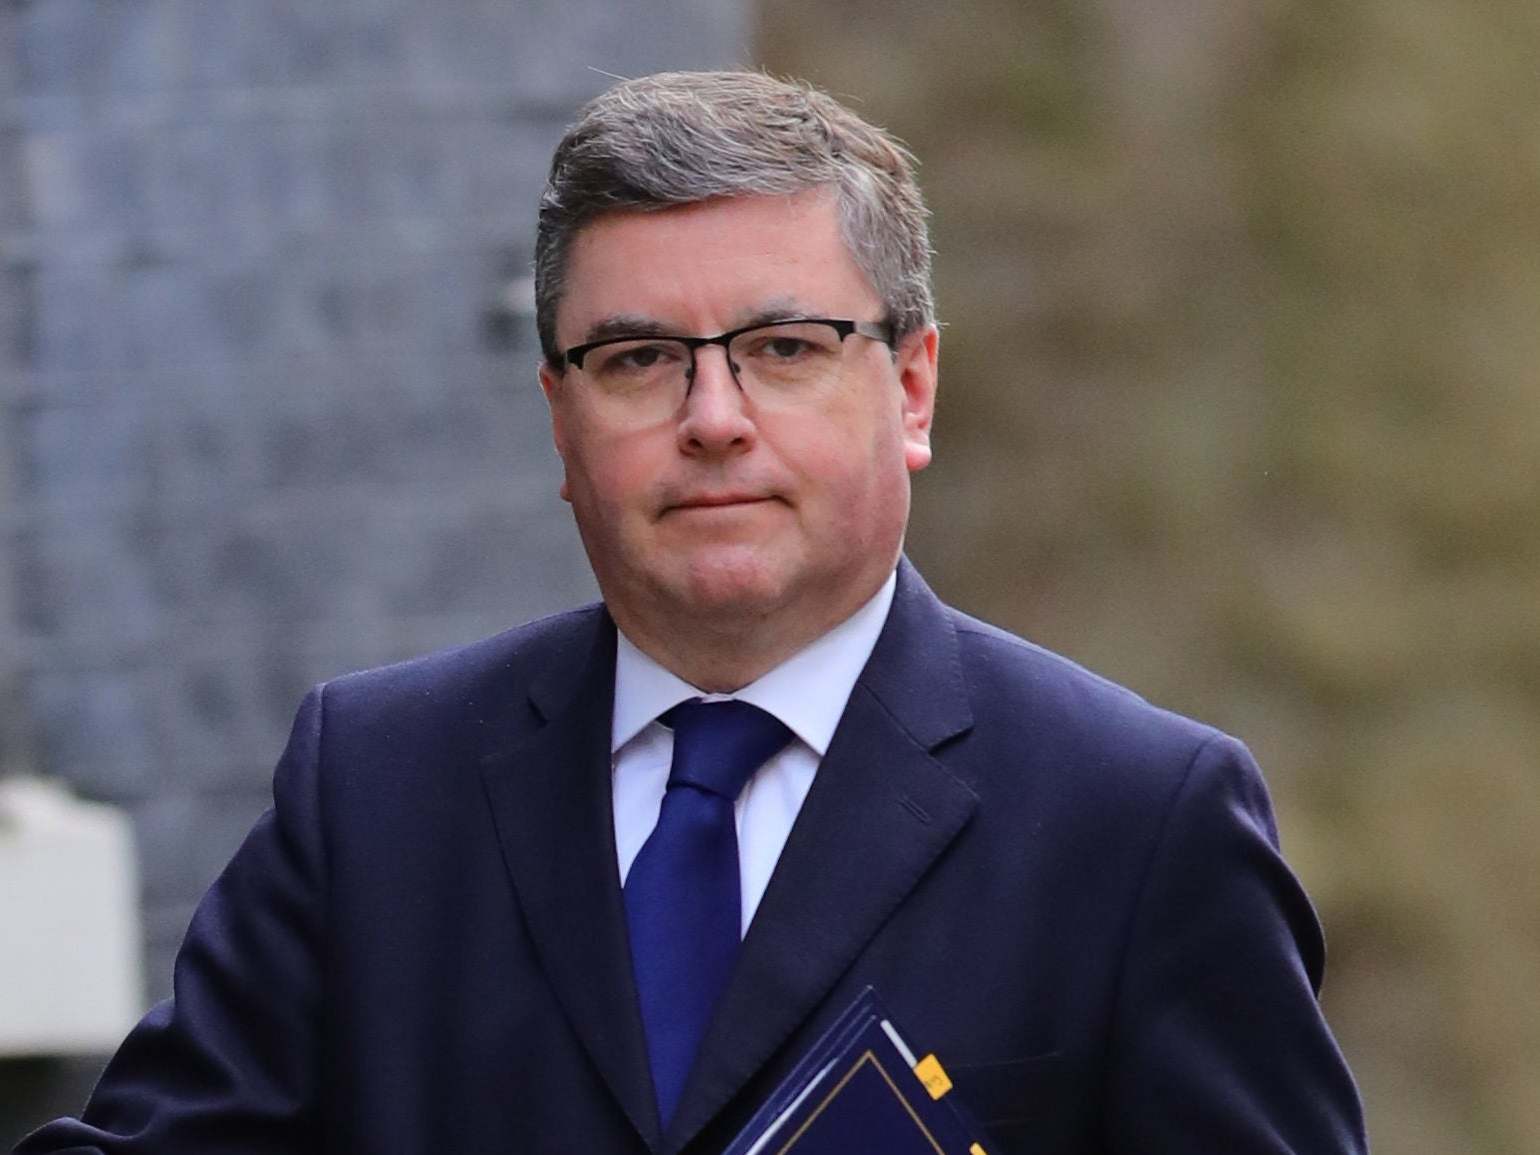 Justice secretary Robert Buckland said the temporary courts would 'reduce delays and deliver speedier justice for victims'.